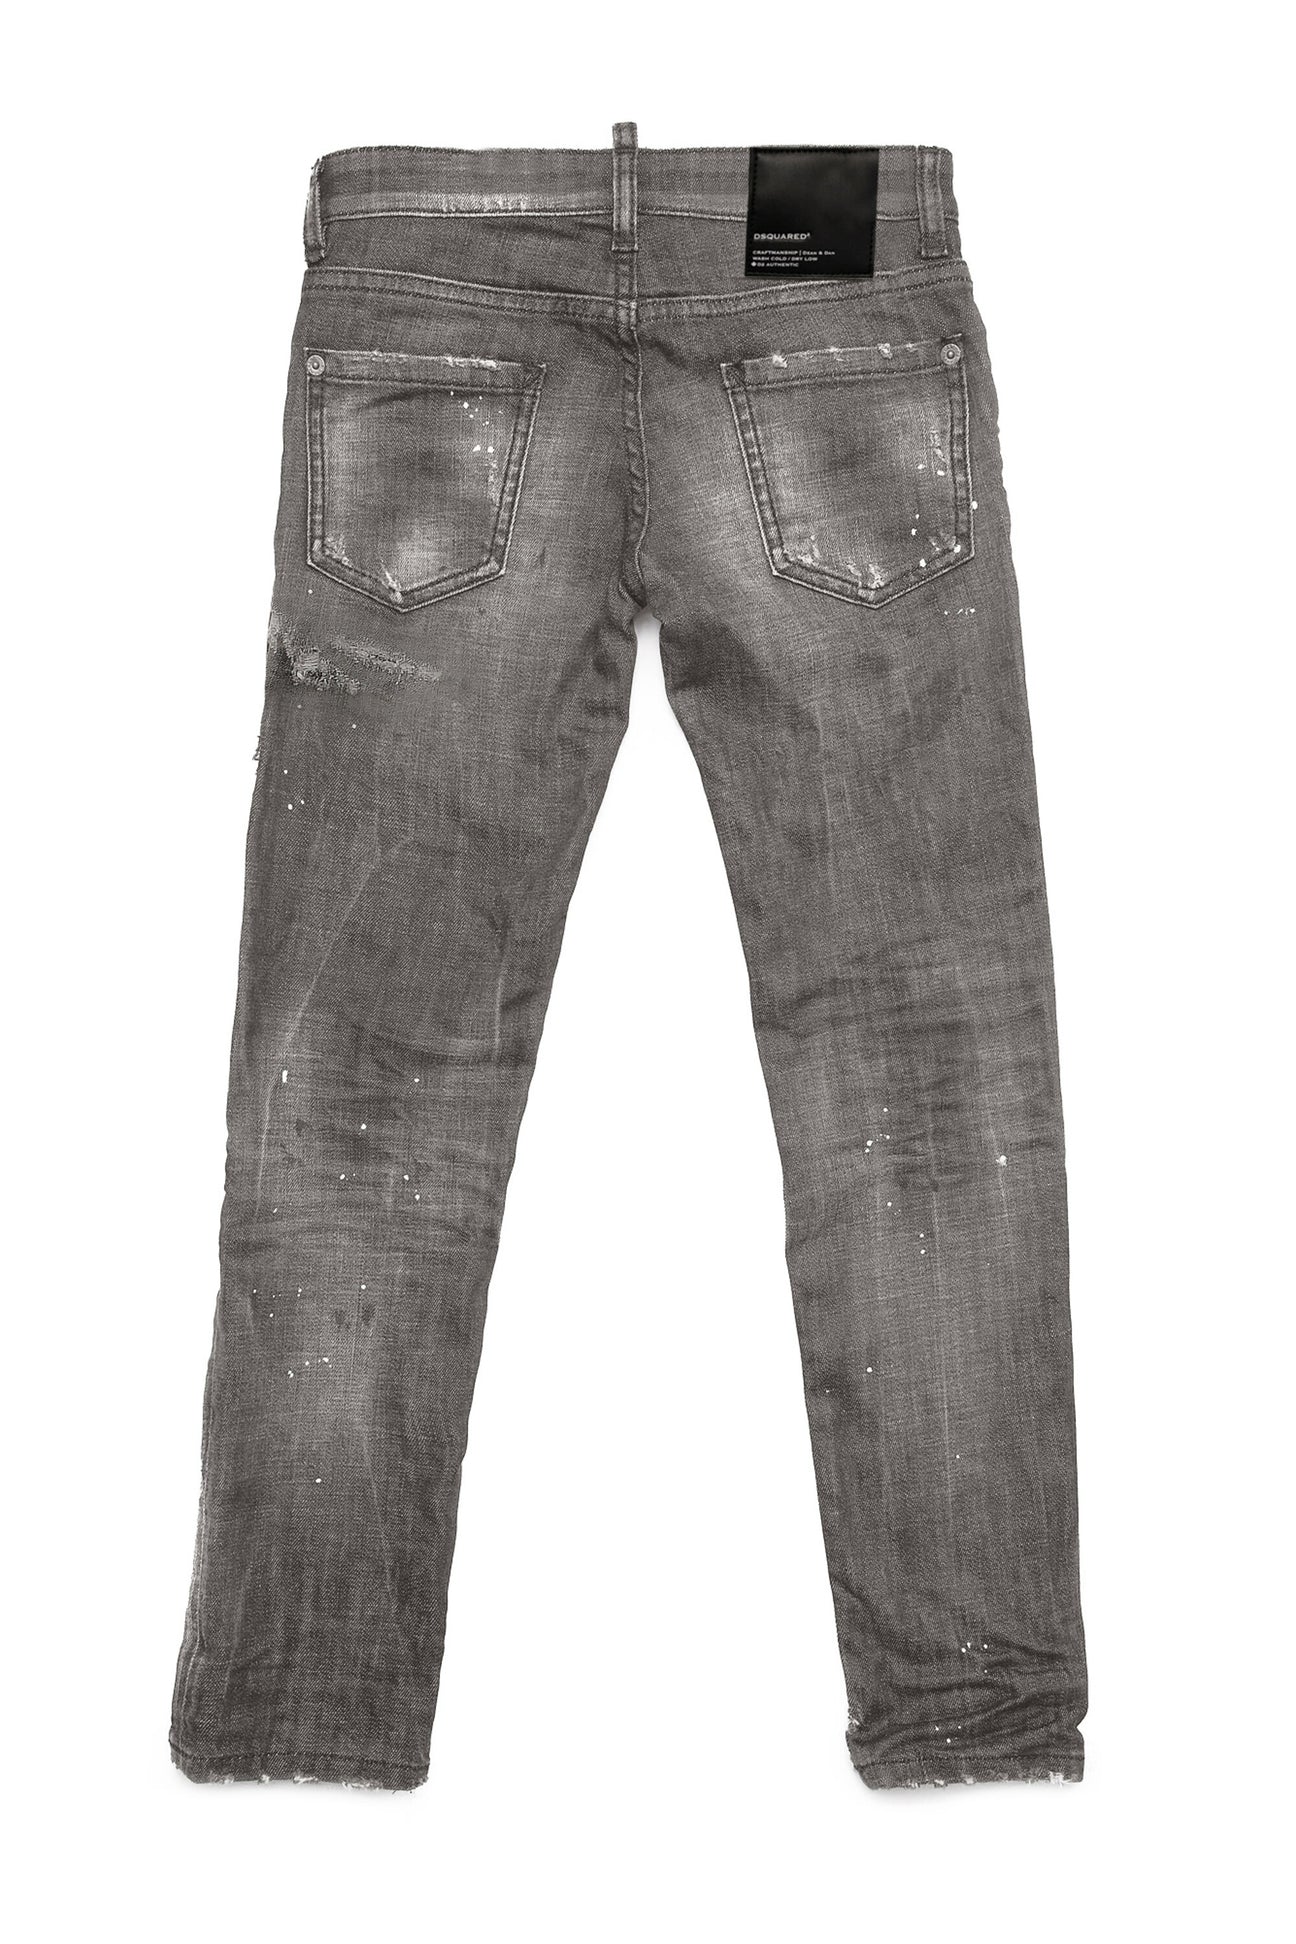 Slim straight gray jeans shaded with abrasions and stains Slim straight gray jeans shaded with abrasions and stains